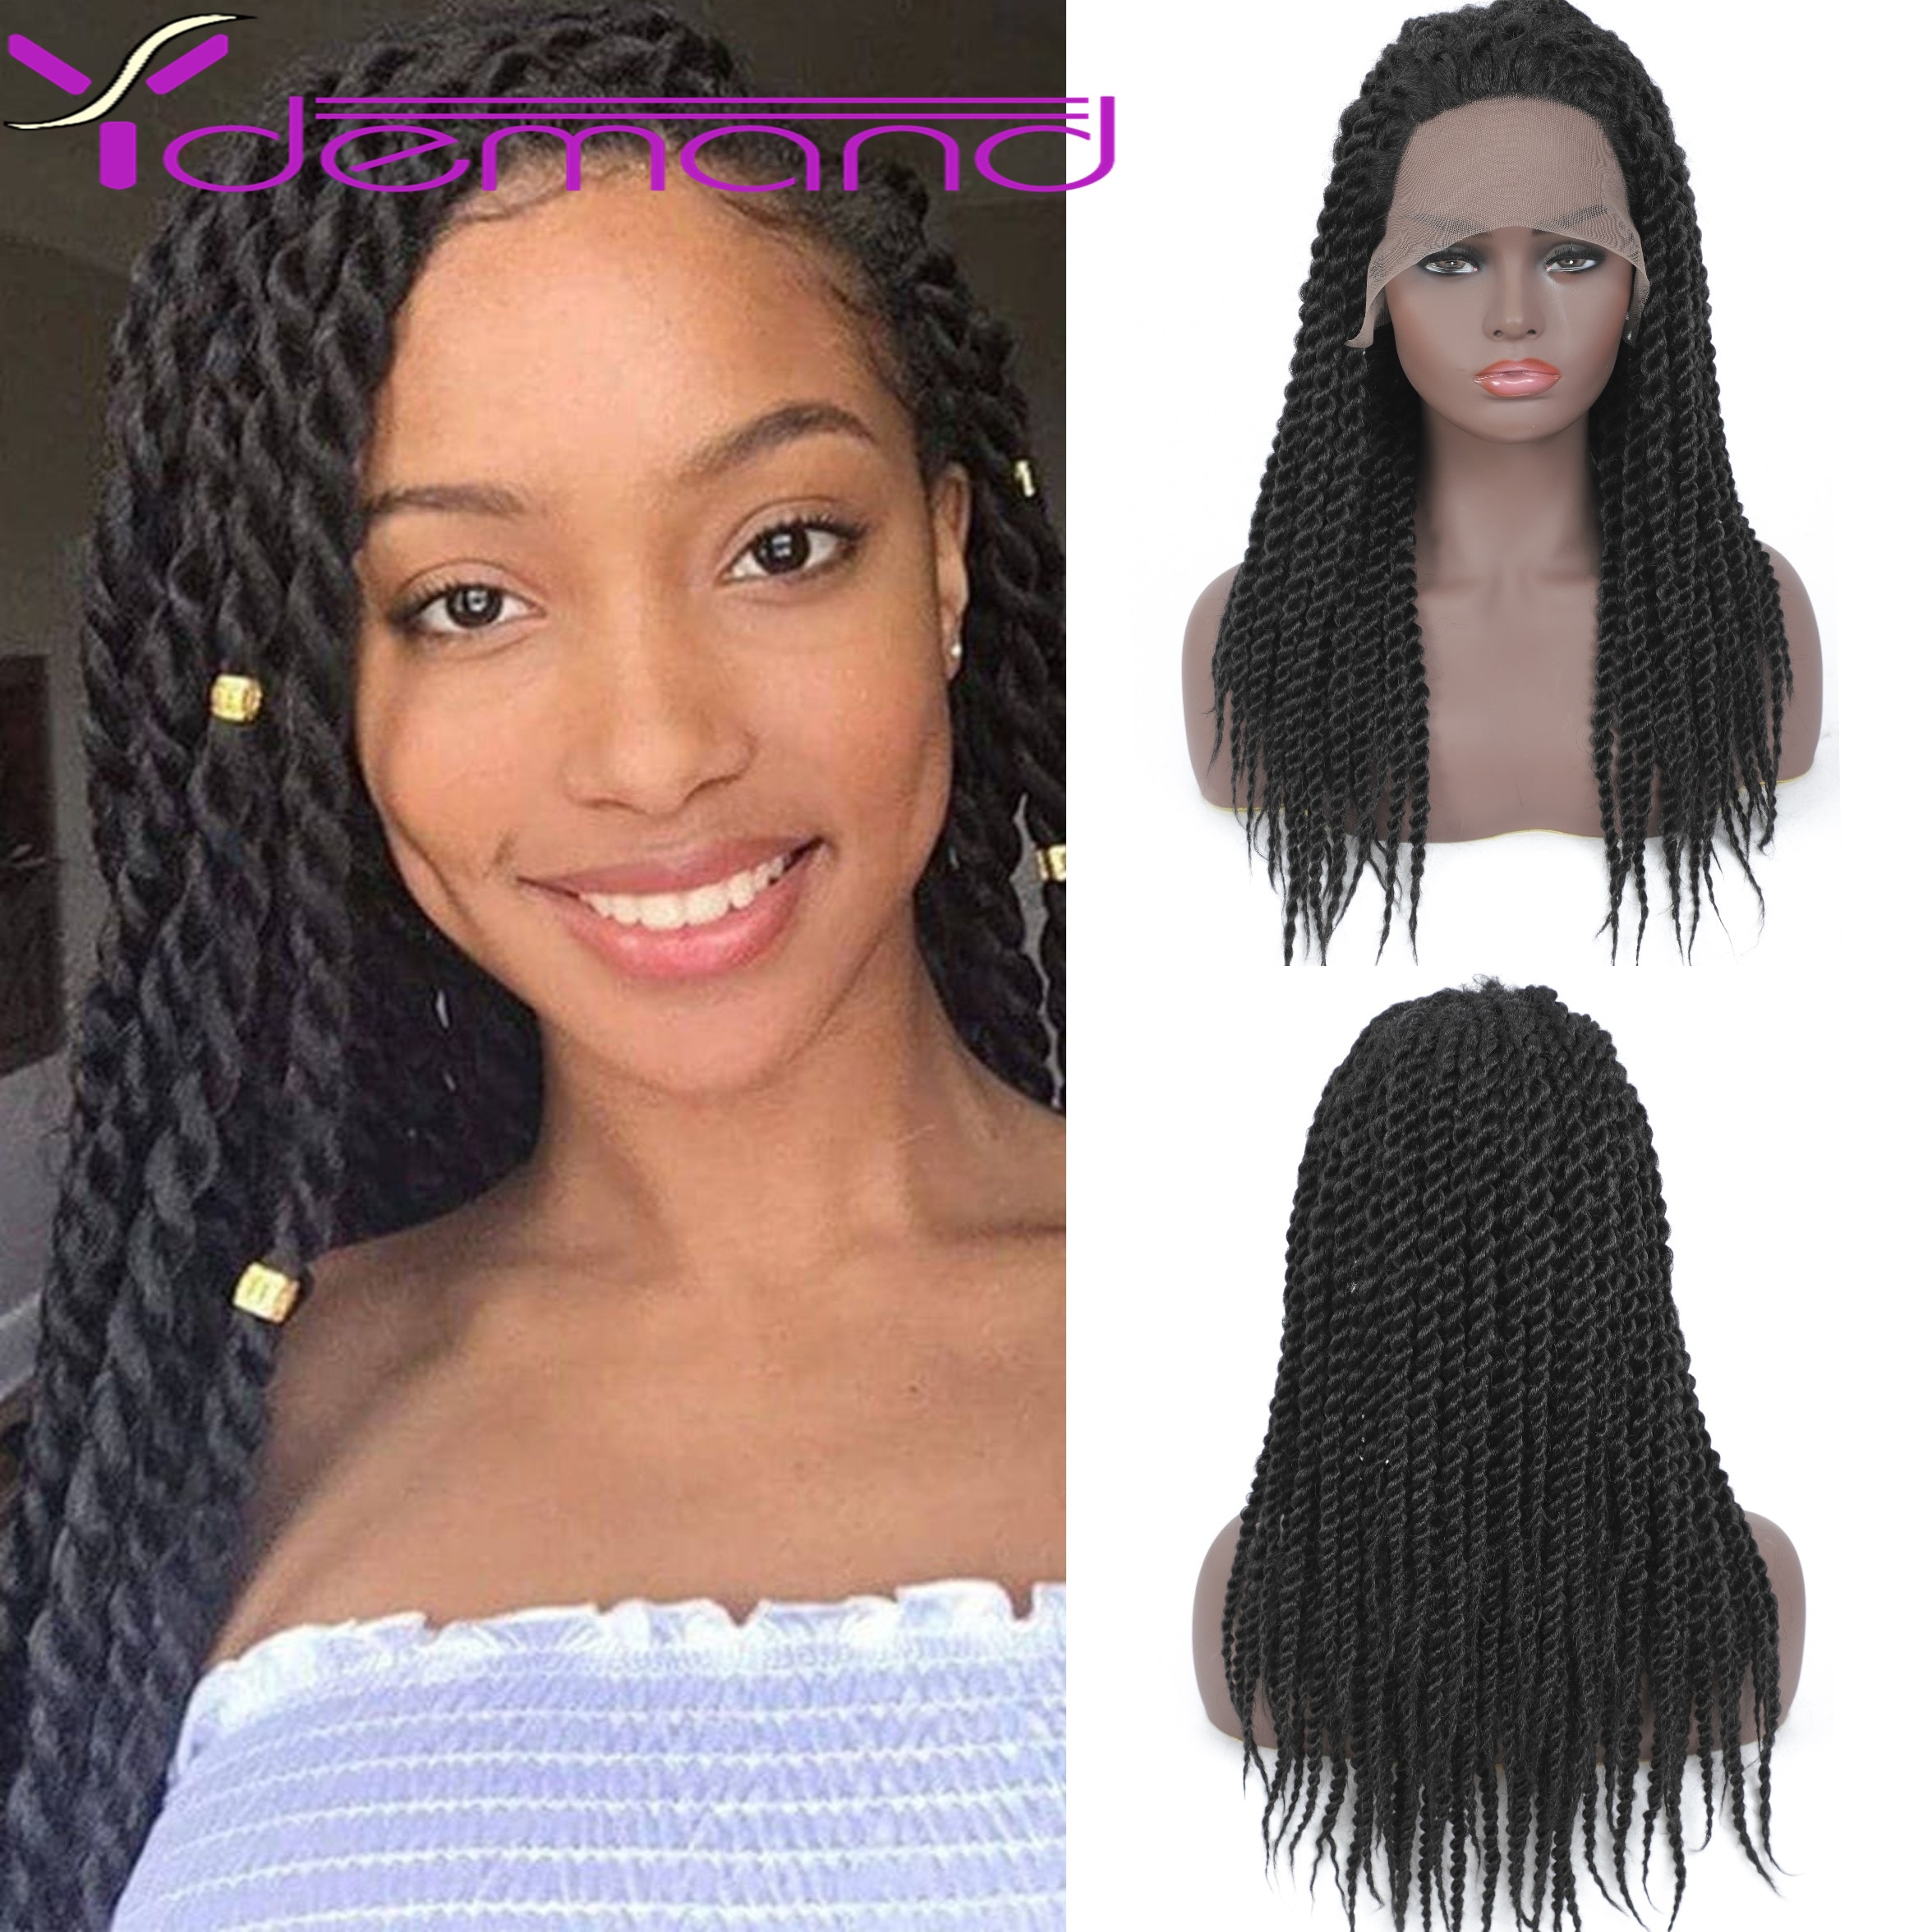 Y Demand Synthetic Lace Front Wig Afro 2x Twist Braids Wigs For Black Women Mambo Full Head Wig Braided Wig